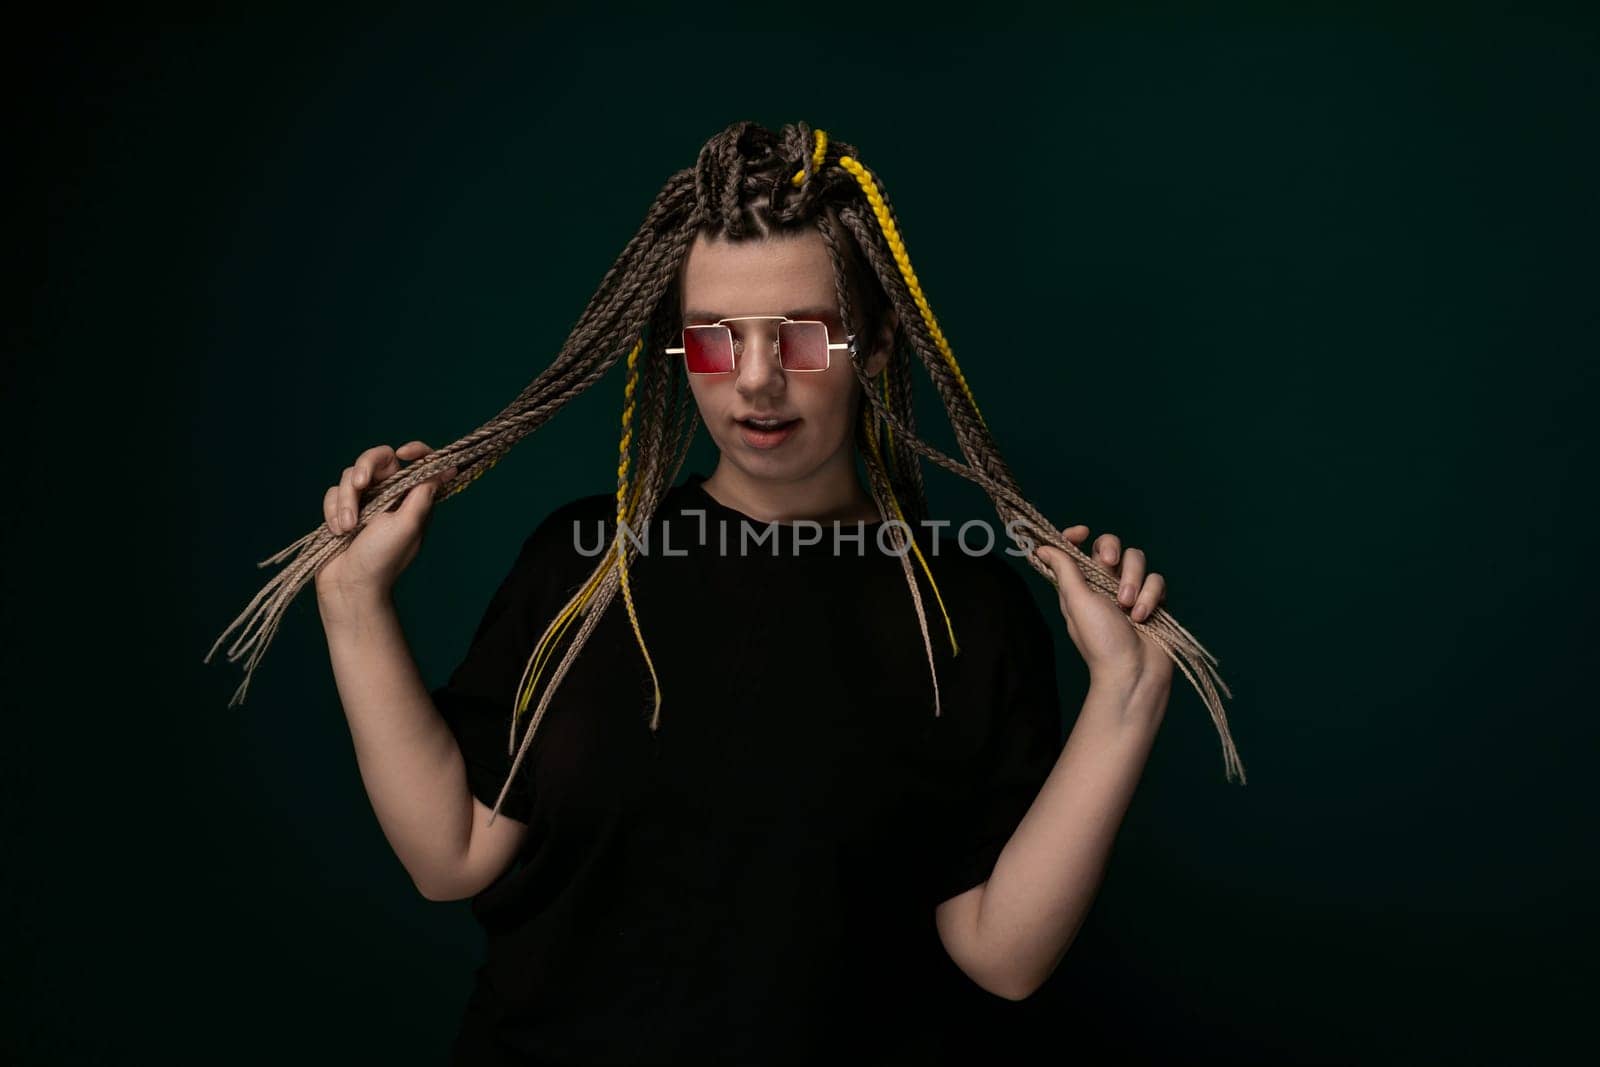 A Man With Long Dreadlocks and Red Glasses by TRMK